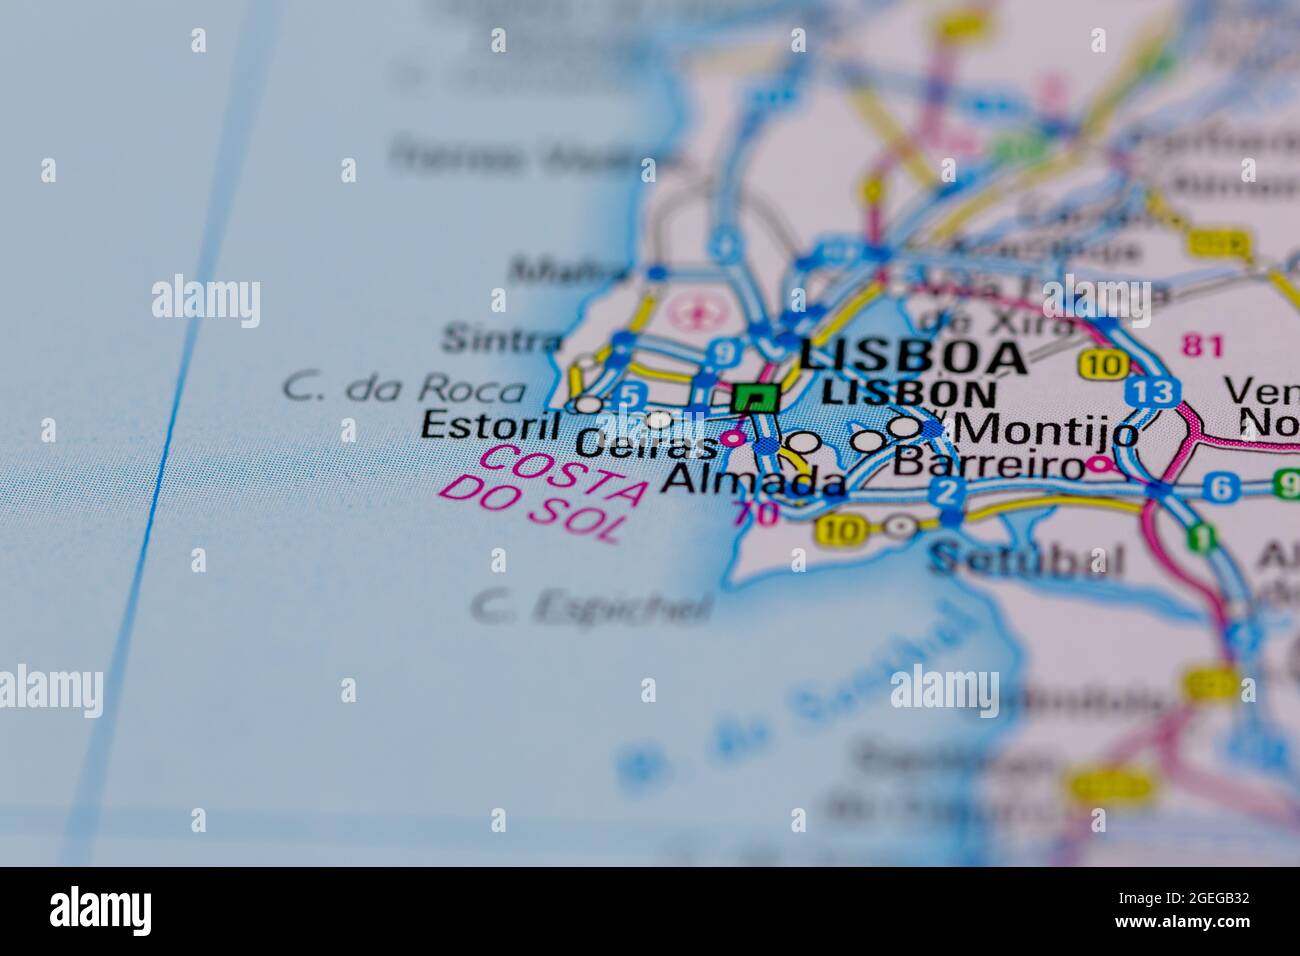 Oeiras Portugal shown on a road map or Geography map Stock Photo